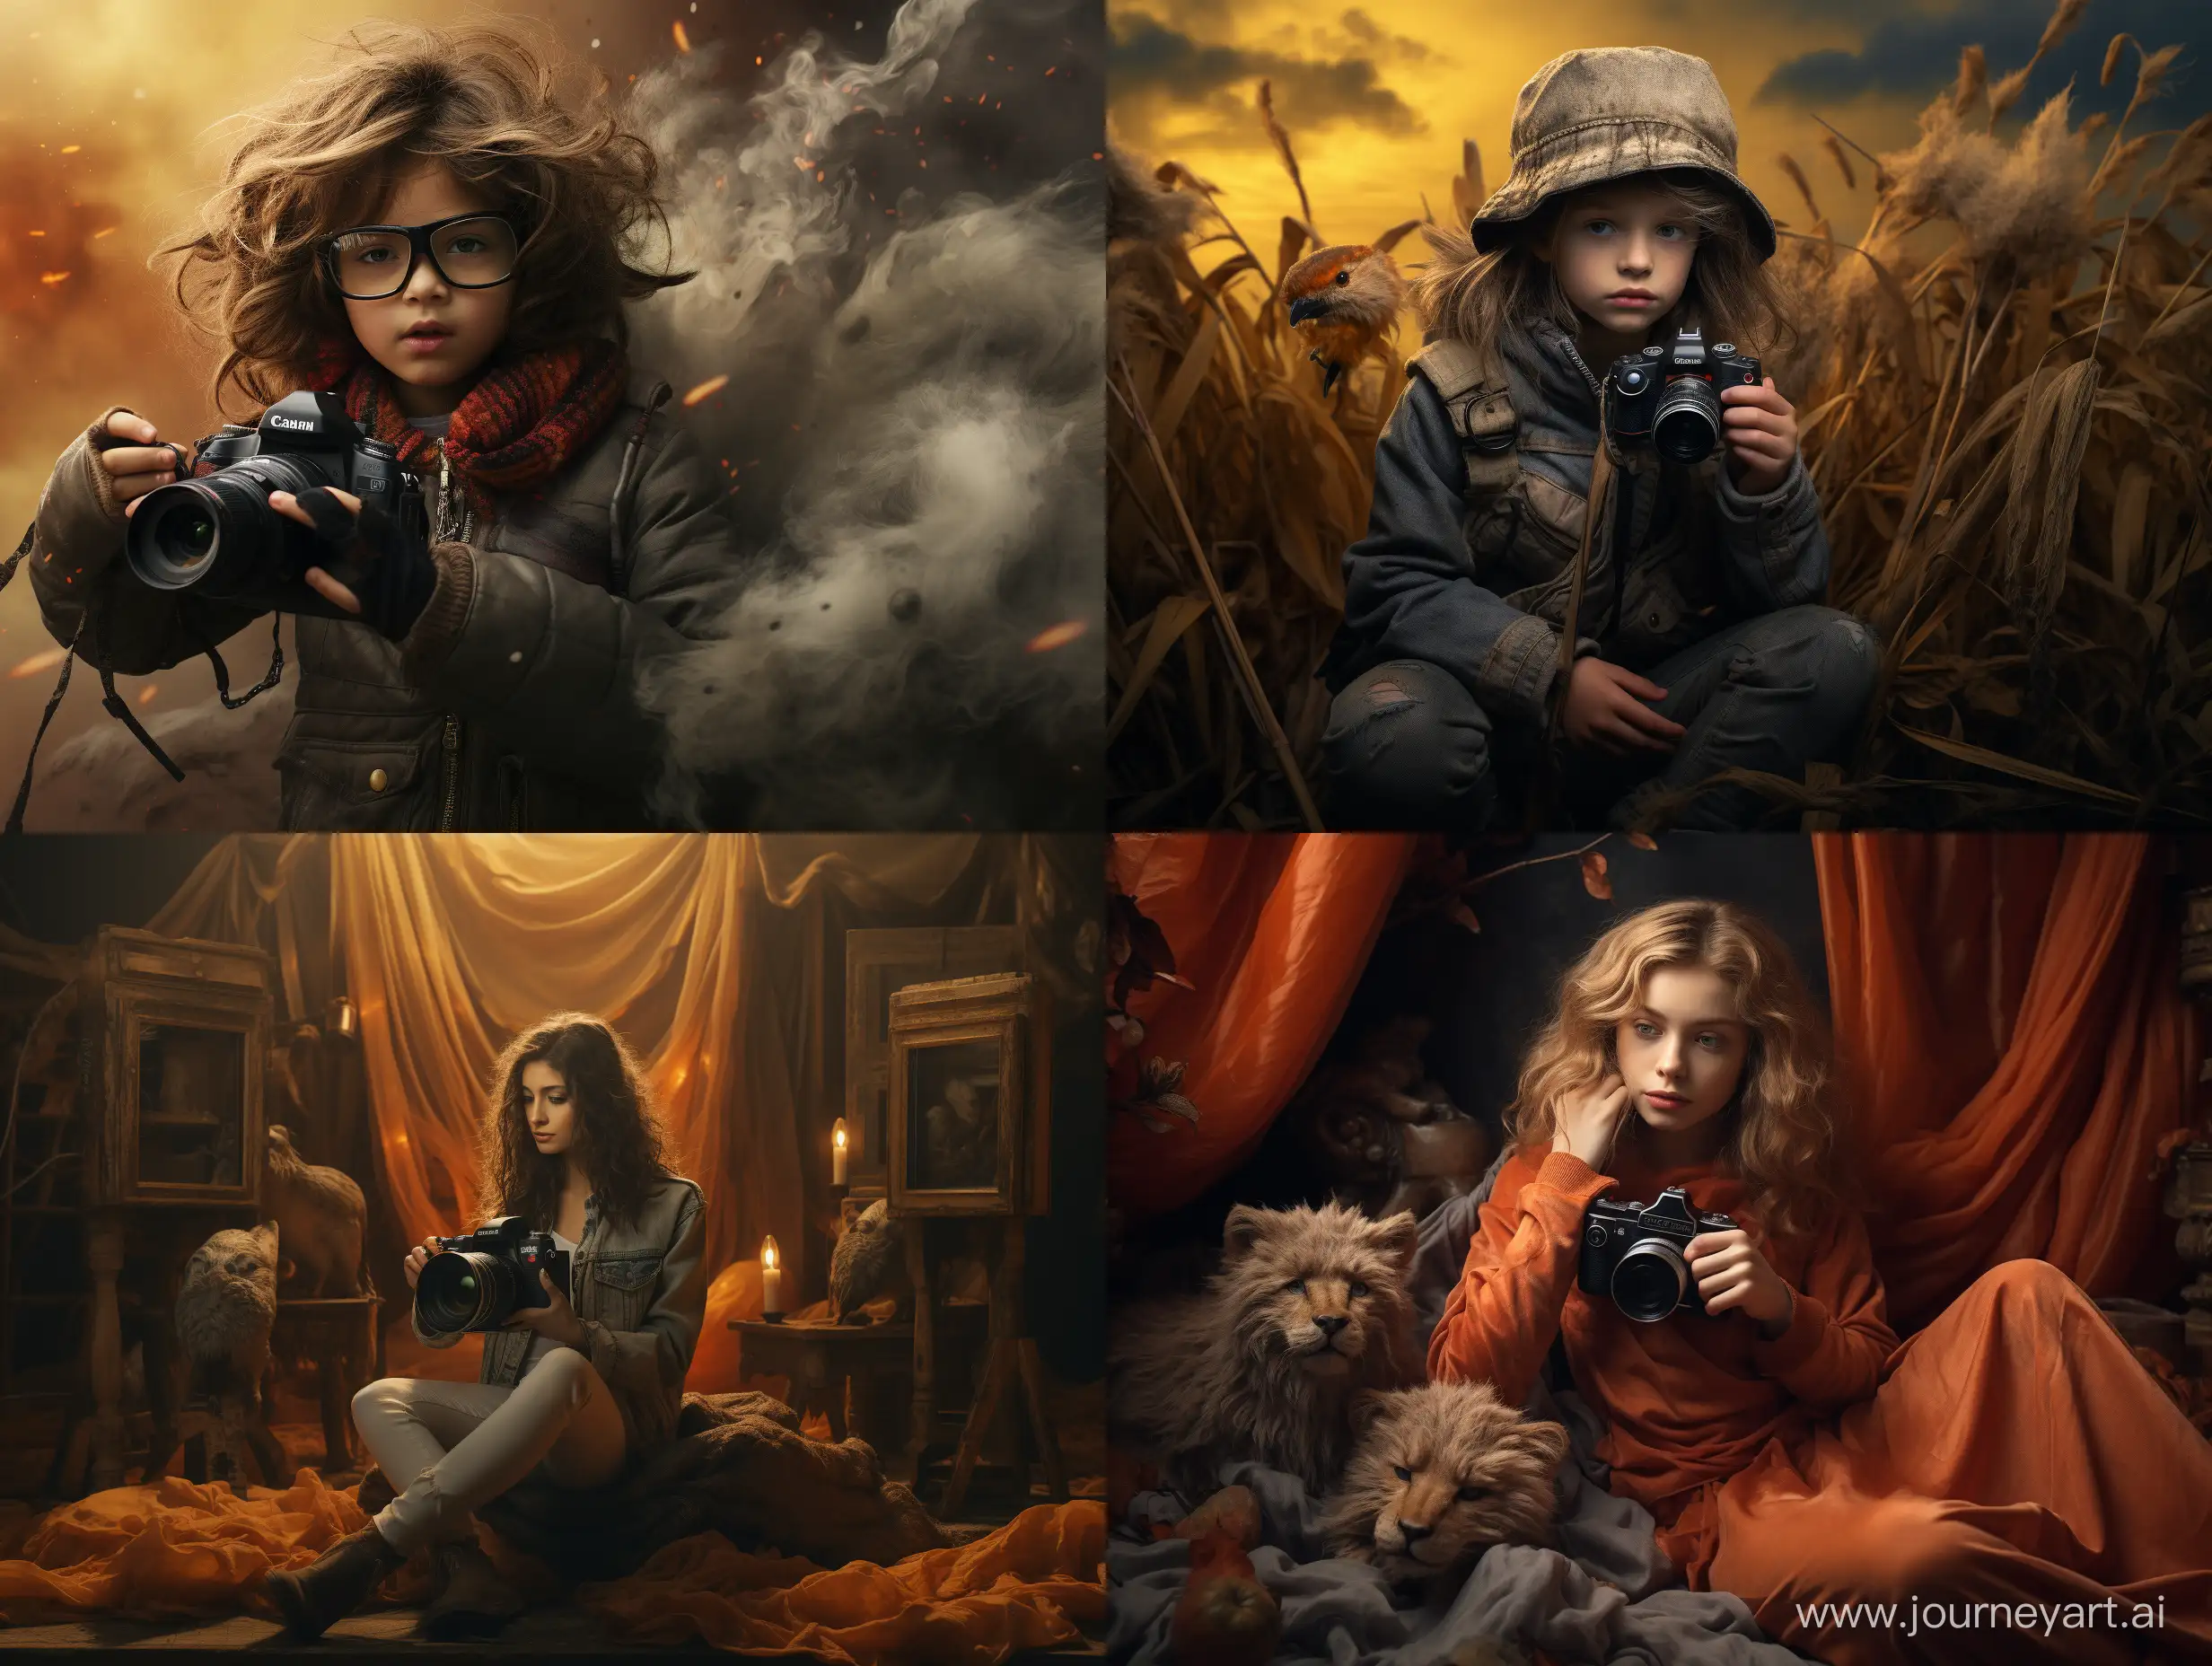 Creative-Photography-Session-in-43-Aspect-Ratio-Special-Purpose-Photographer